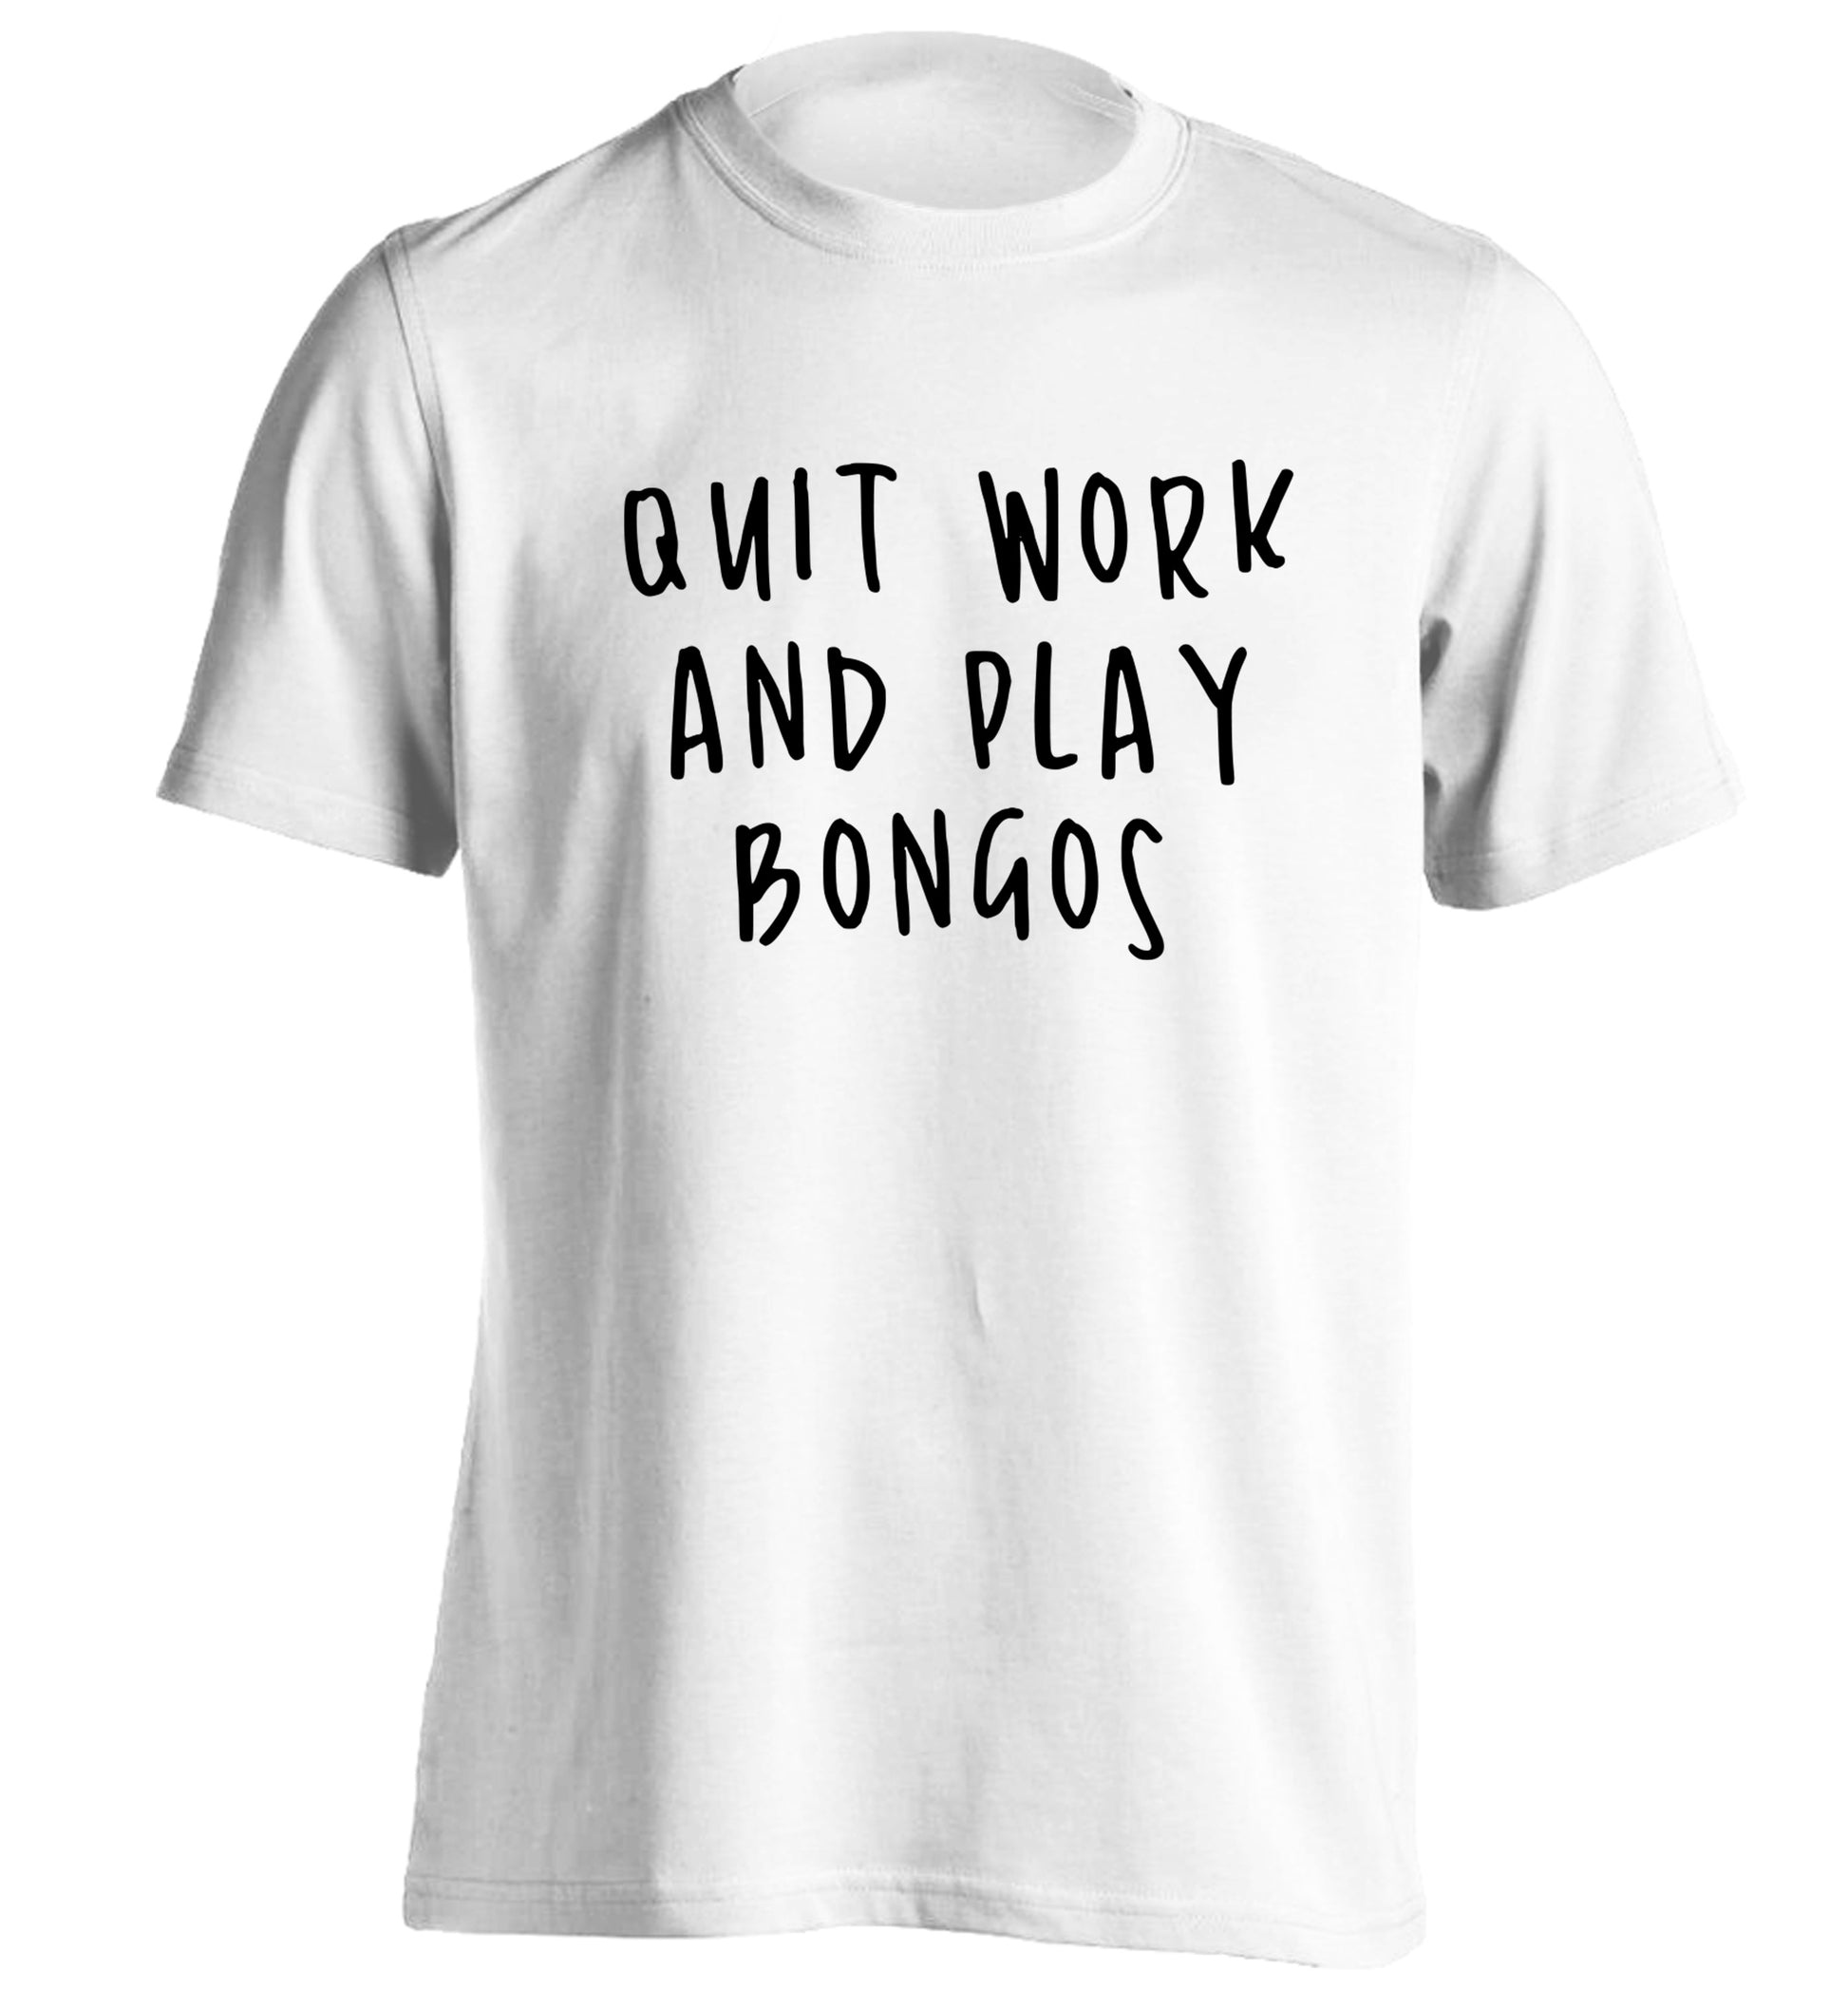 Quit work and play bongos adults unisex white Tshirt 2XL